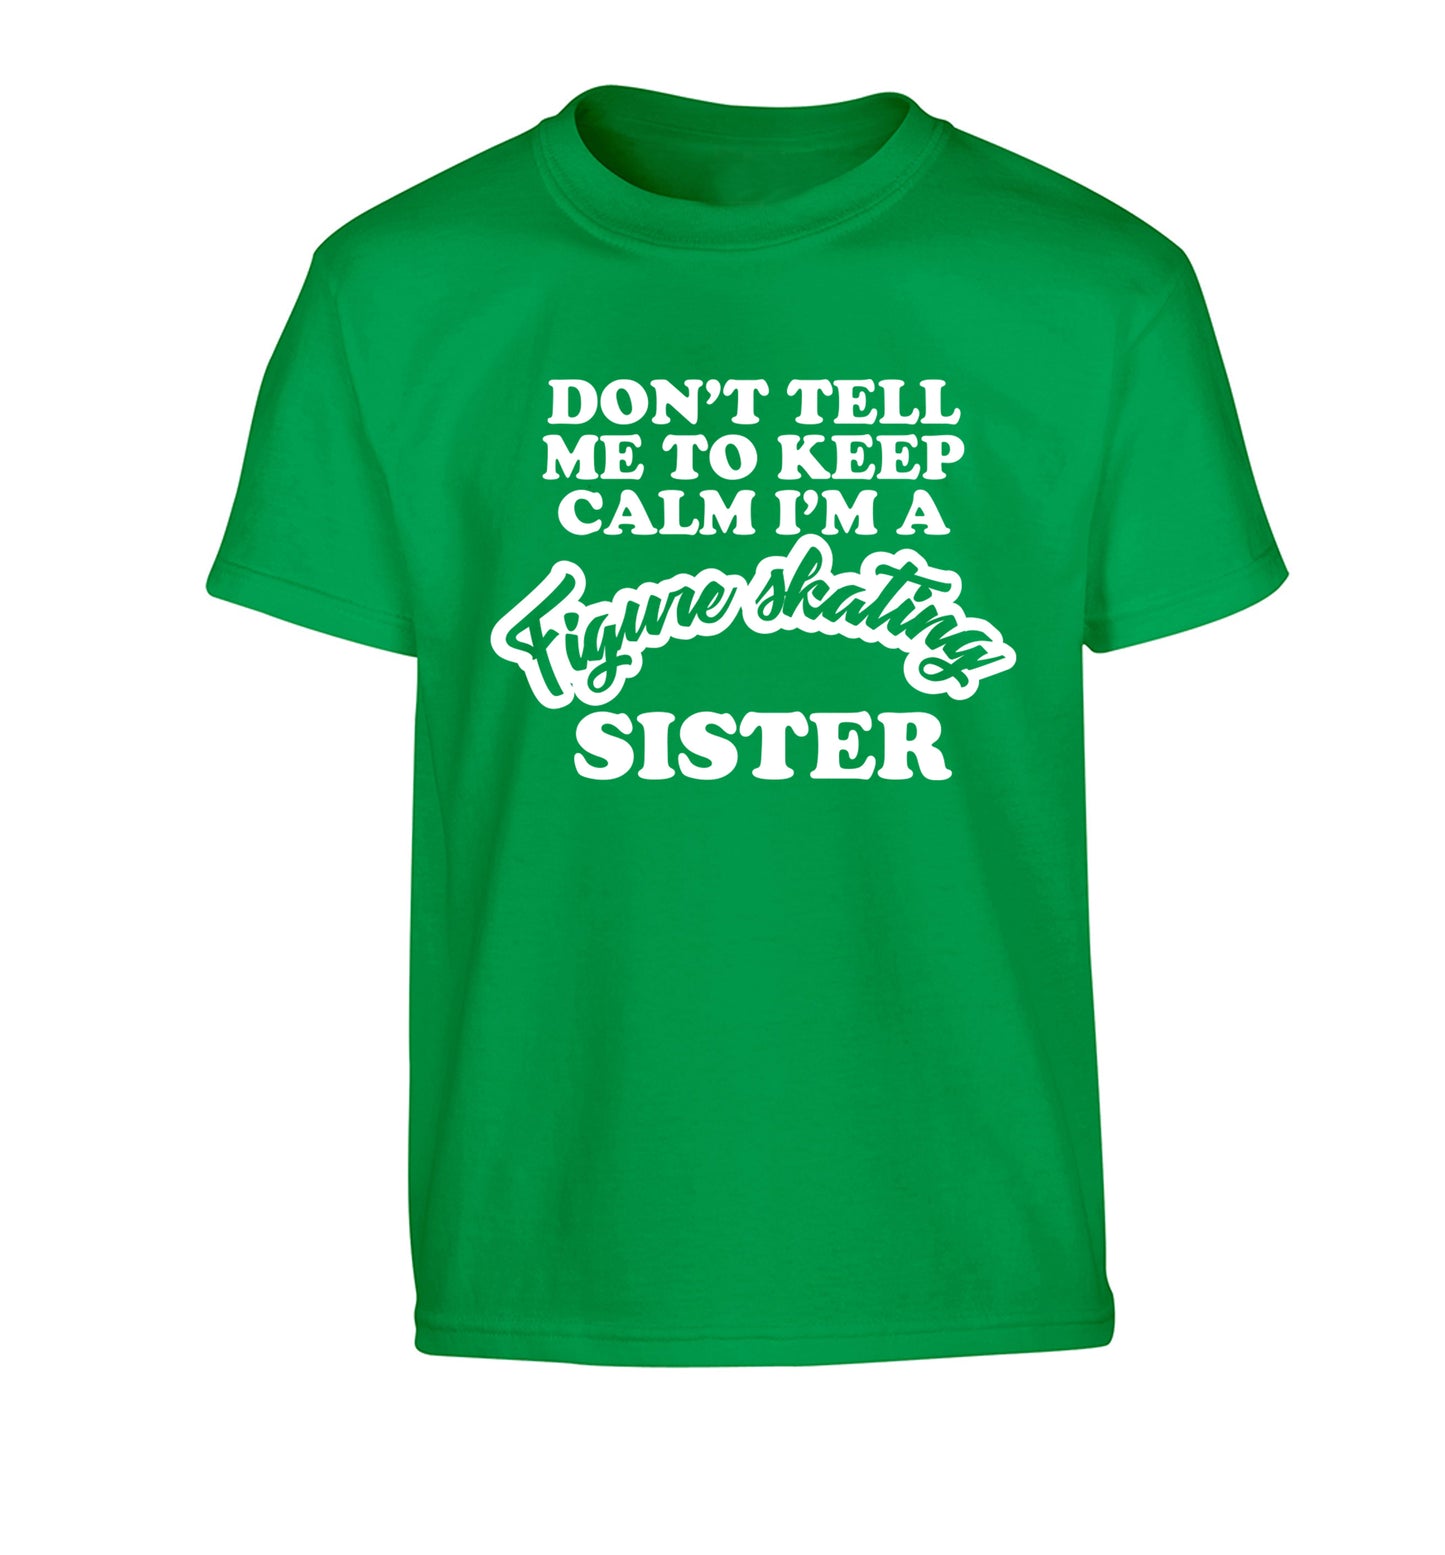 Don't tell me to keep calm I'm a figure skating sister Children's green Tshirt 12-14 Years